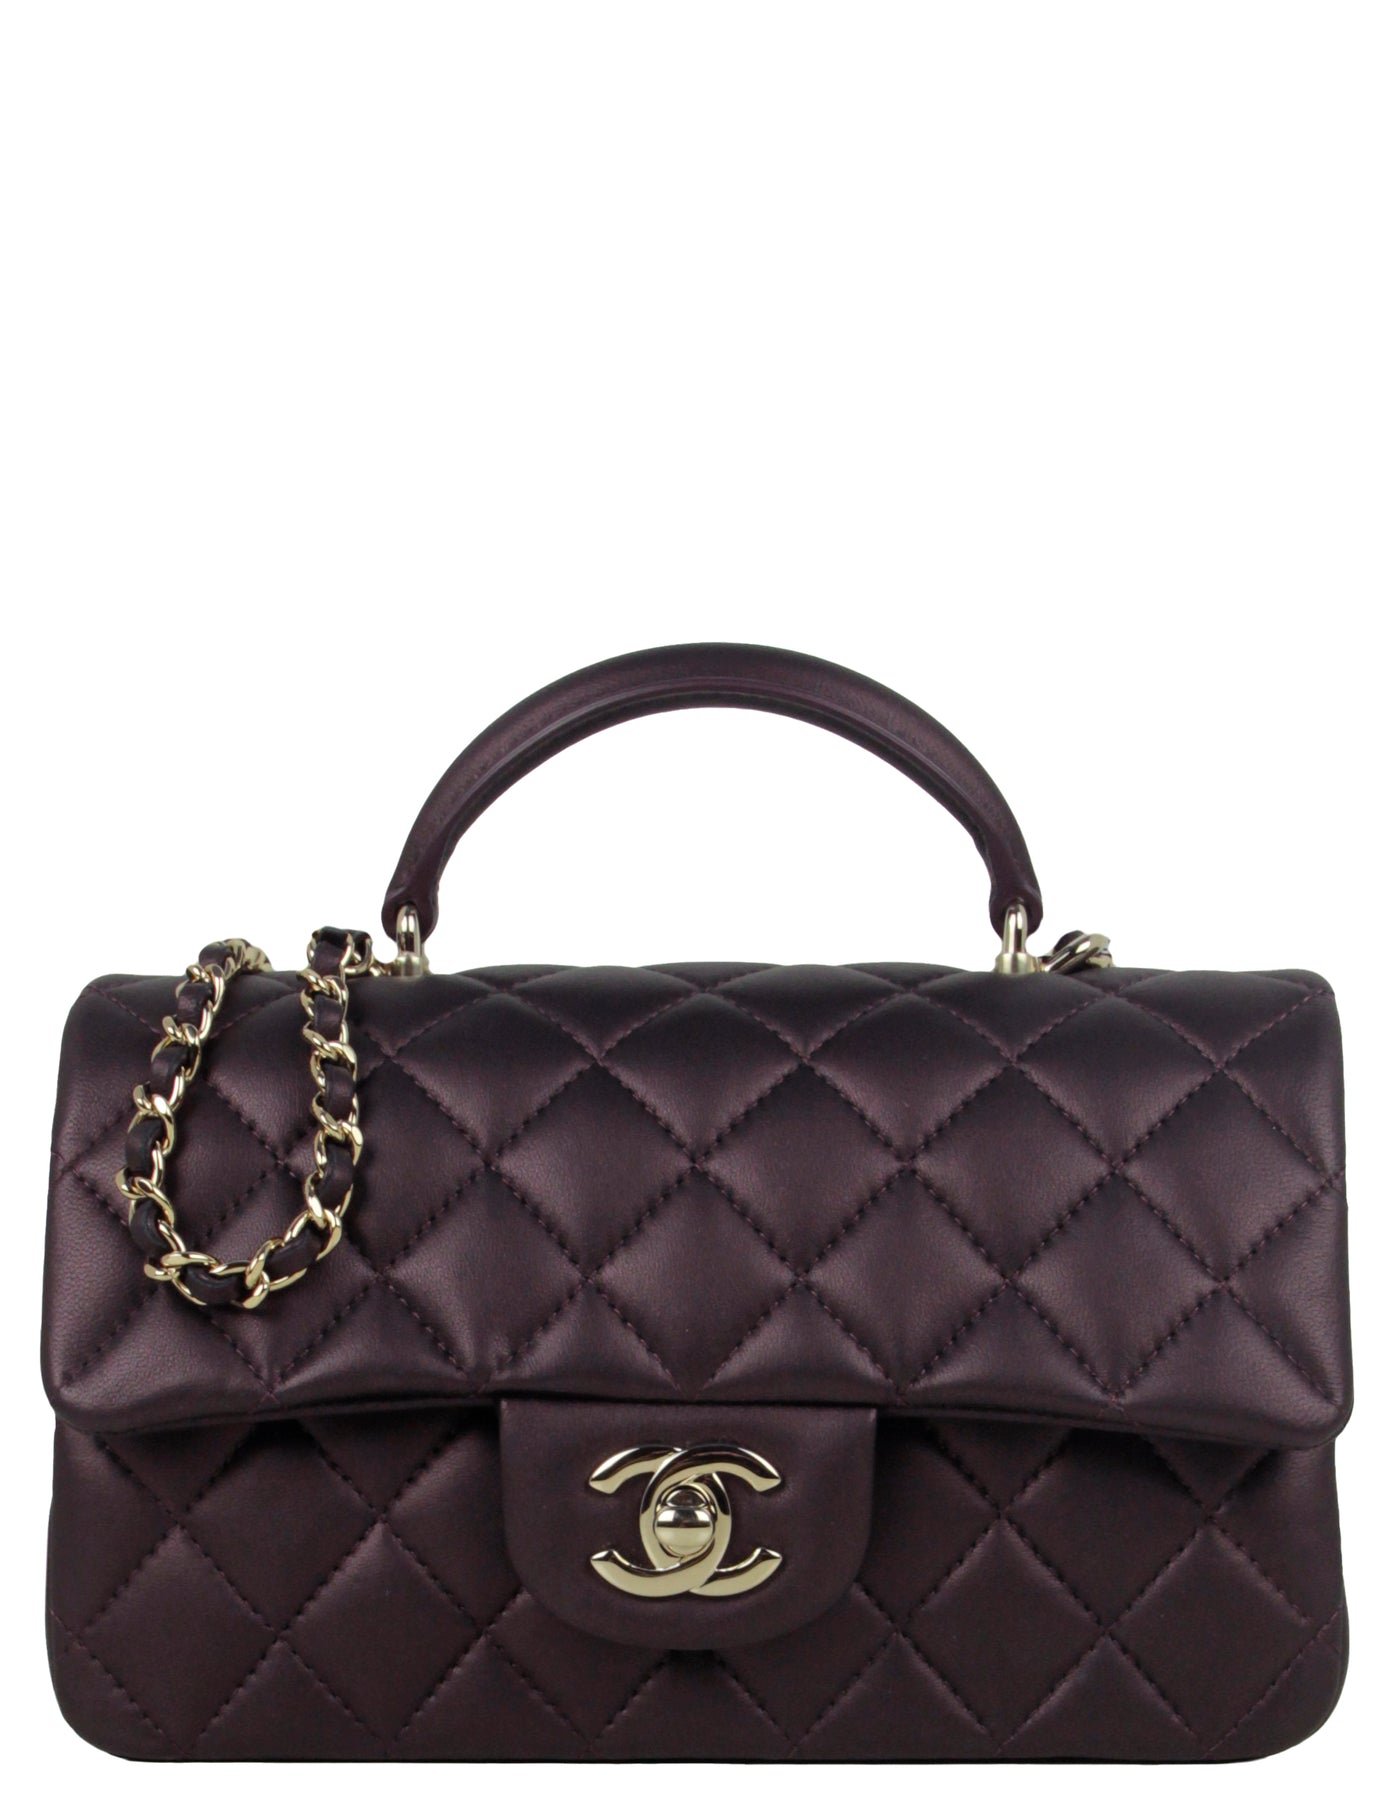 Chanel Burgundy Quilted Lambskin Trendy CC Wallet on Chain Woc Gold Hardware, 2022 (Like New), Womens Handbag